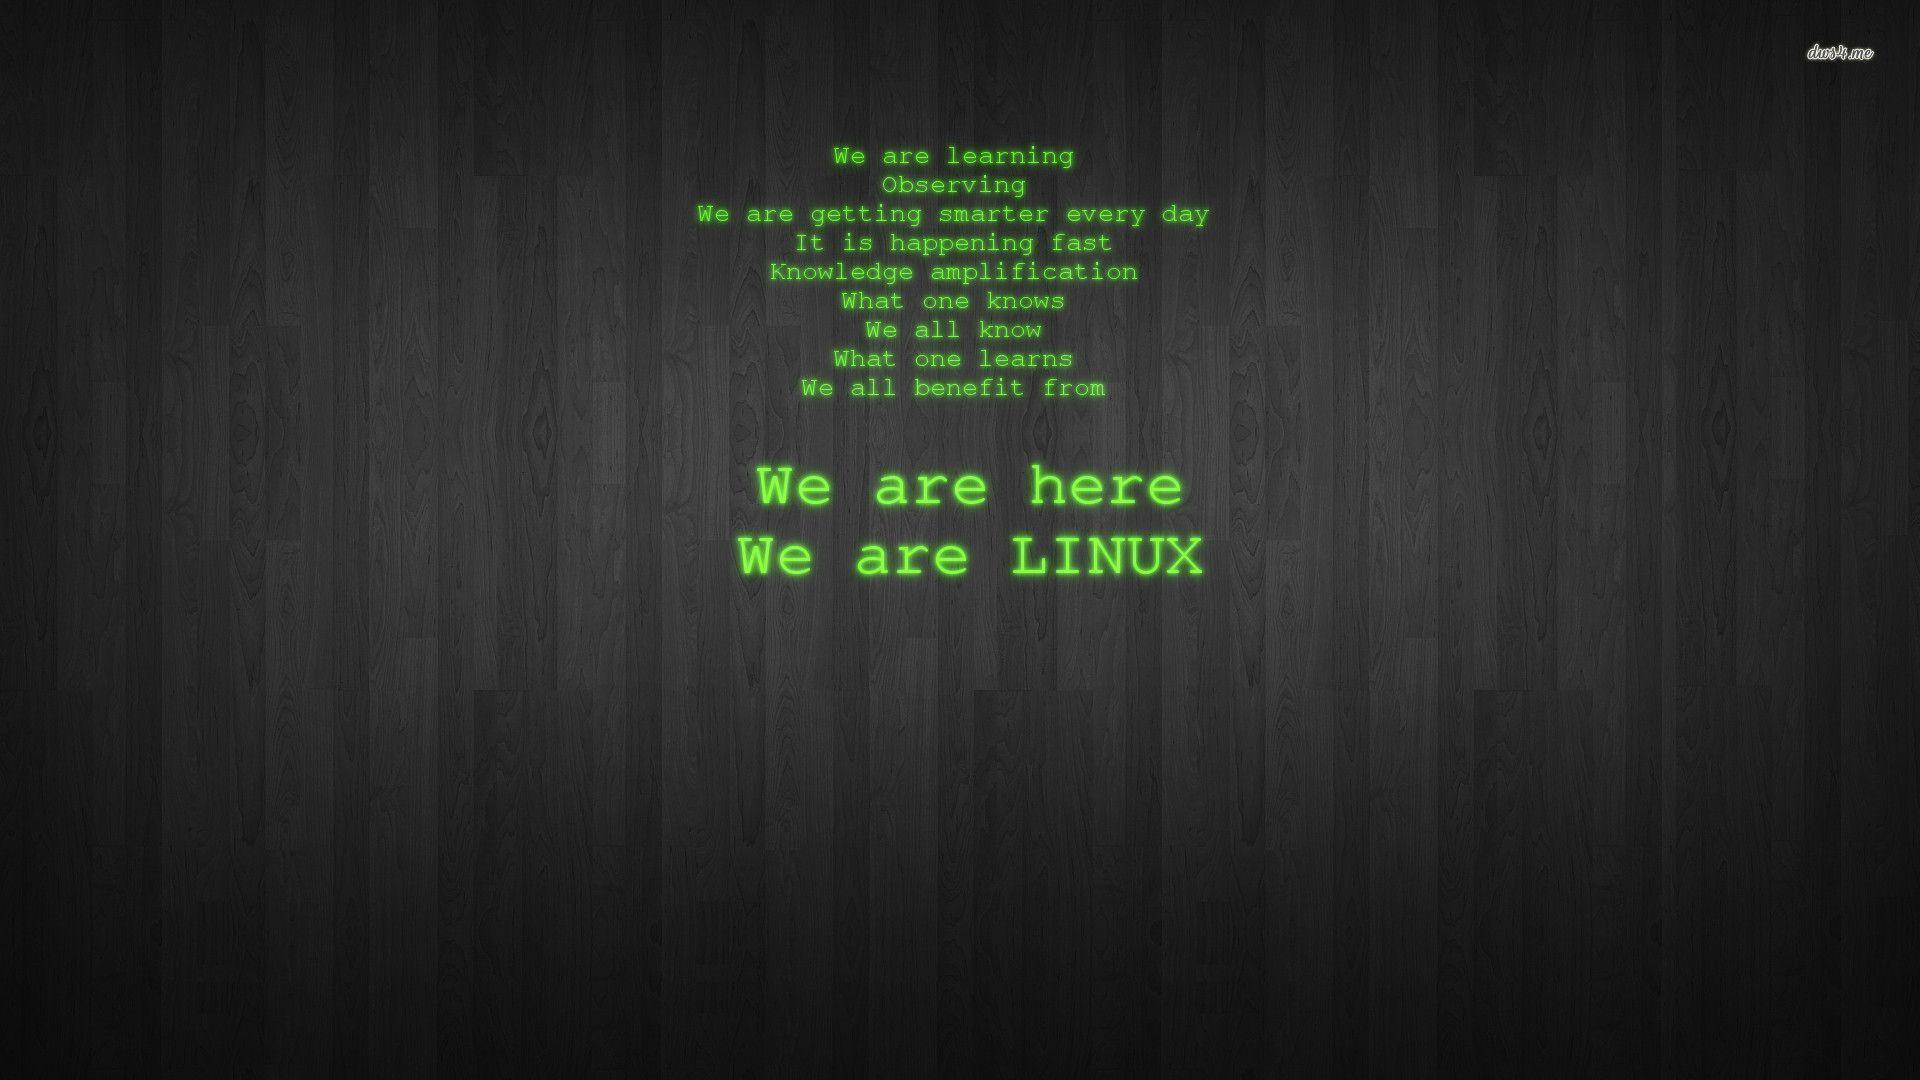 We are linux wallpaper wallpaper - #